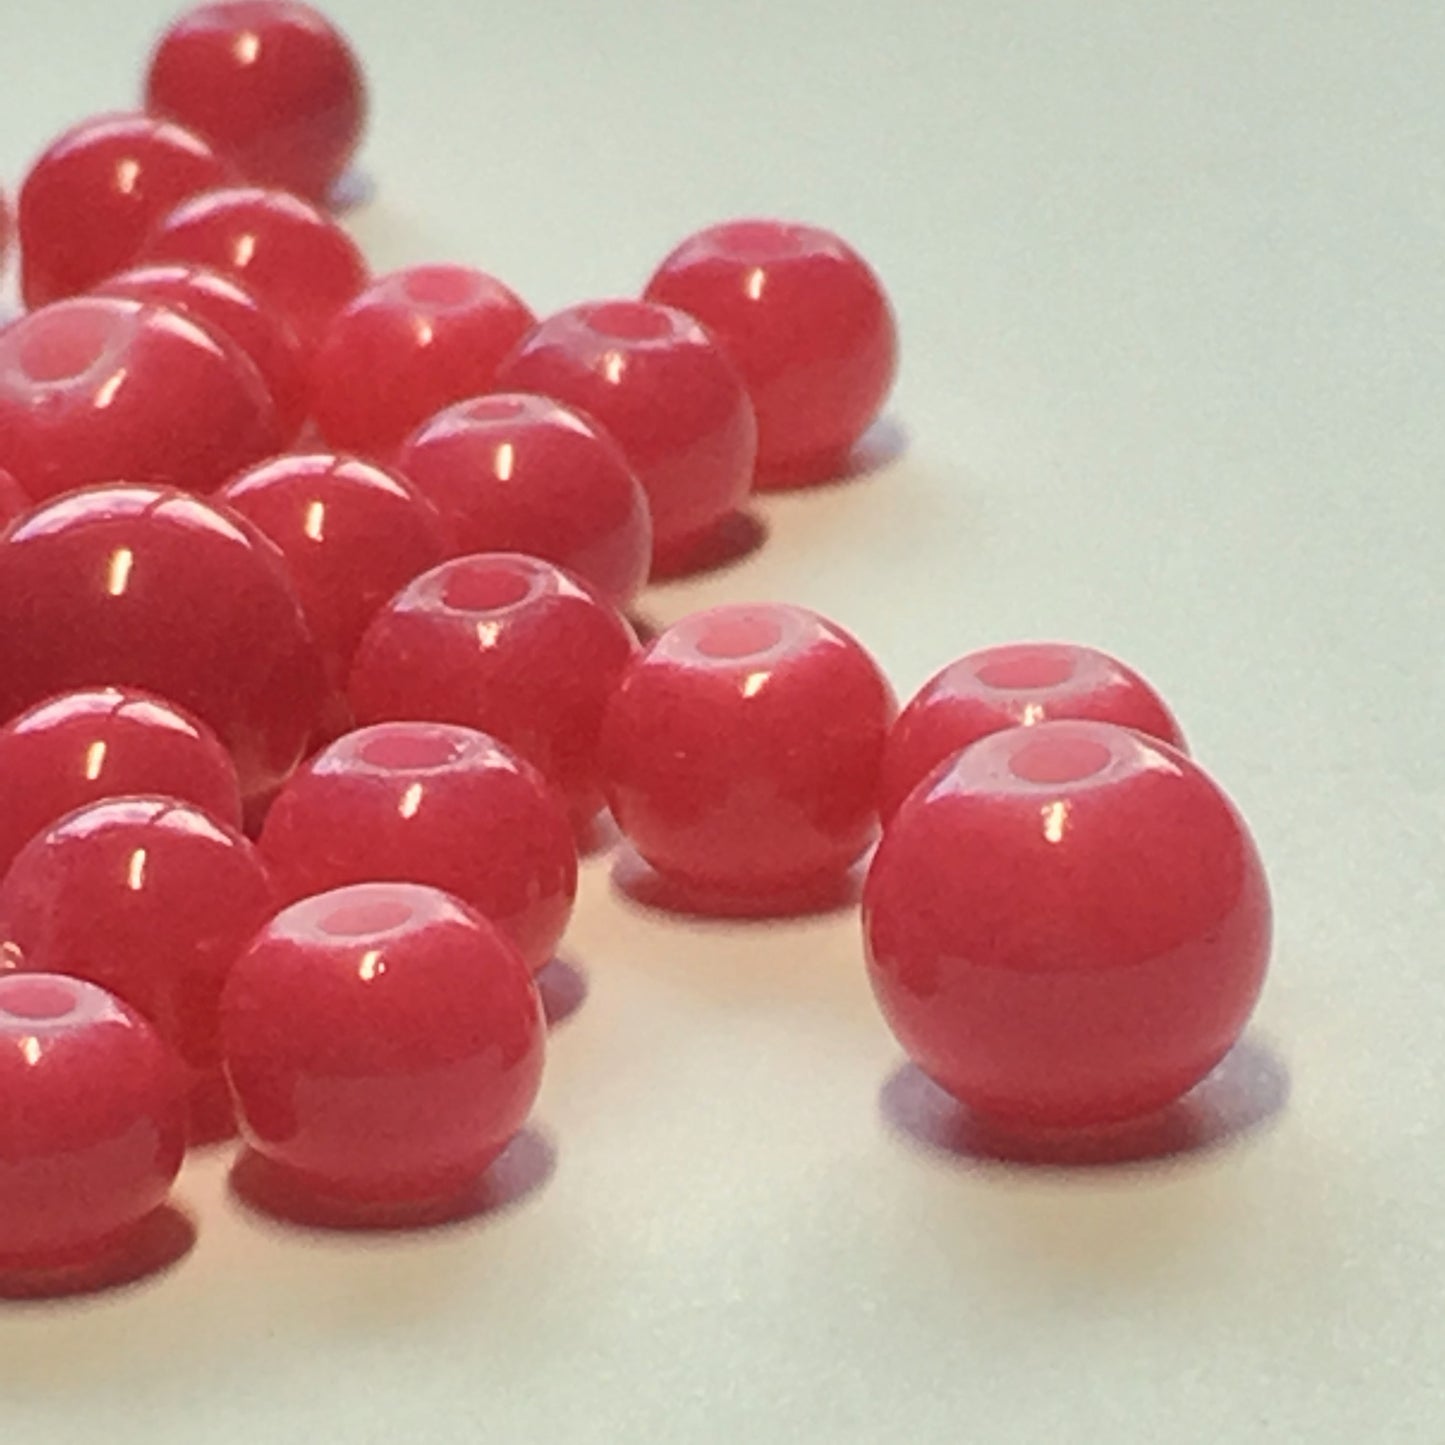 Neon Pink Painted Glass Round Beads, 5 and 7 mm, 42 Beads